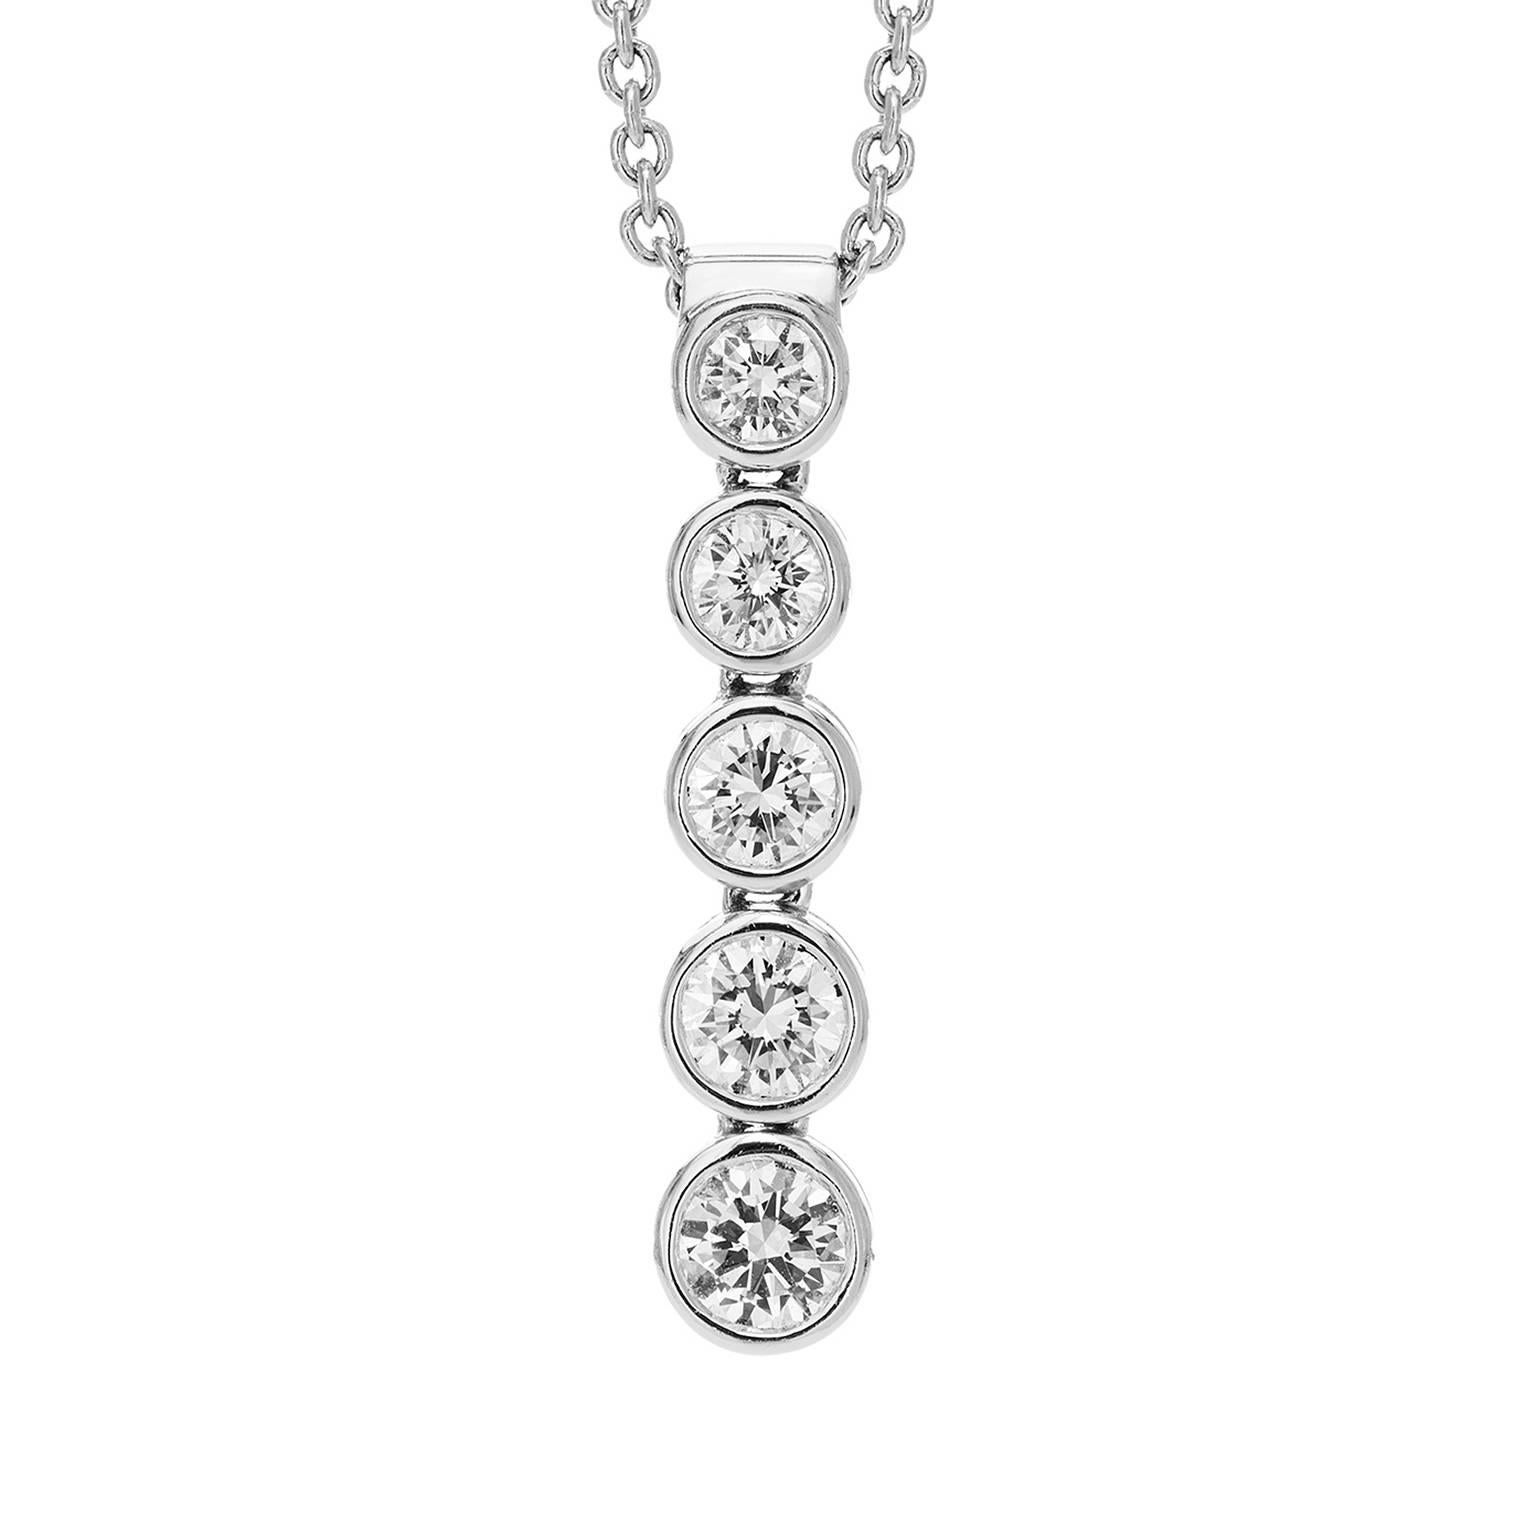 A single row of five diamonds in graduating size cascade downwards in a flexible setting, total carat weight 0.94ct. Colour grade E. Clarity grade VS1-VS2.

Set in 18K white gold. Adjustable chain can be worn at 17" or 16".

Length of